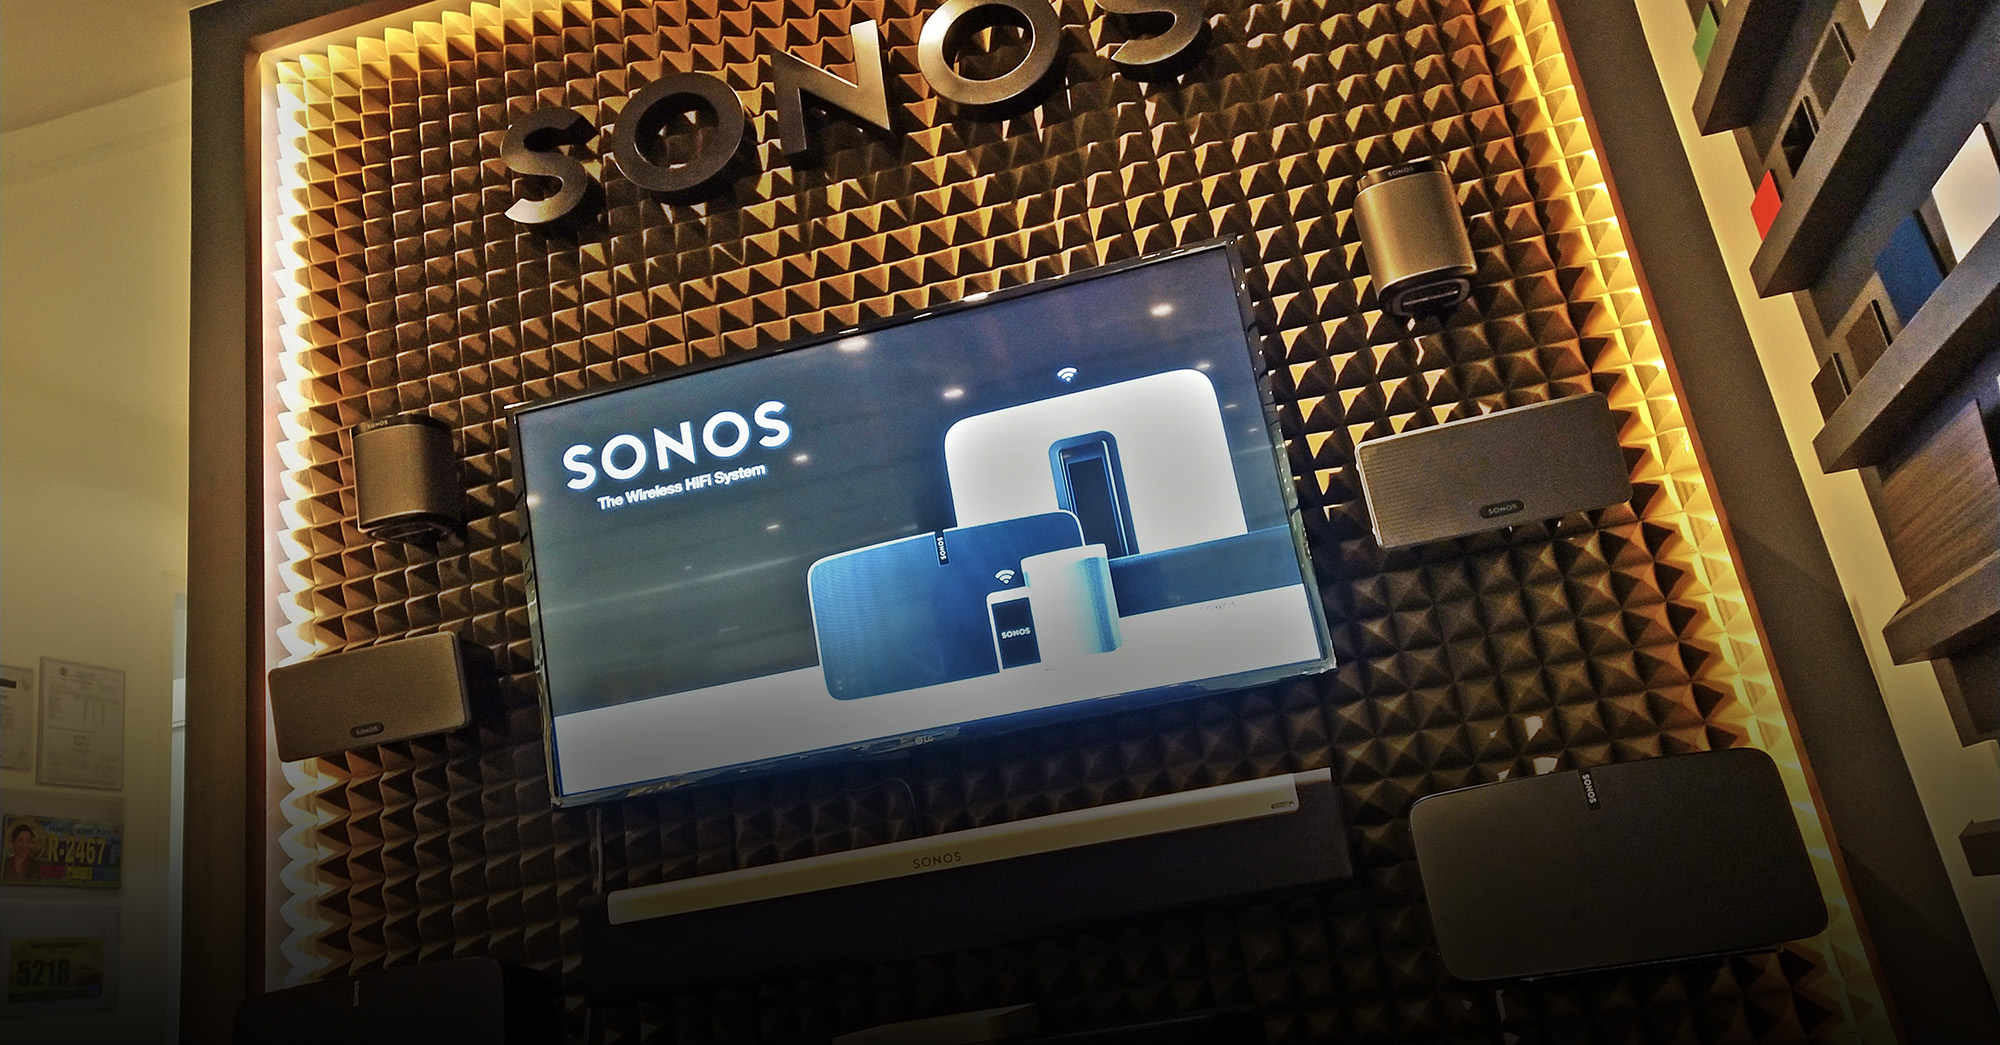 Sonos Unveils Wireless Home Sound System Offering Complete Music Control and Great-Sounding Speakers